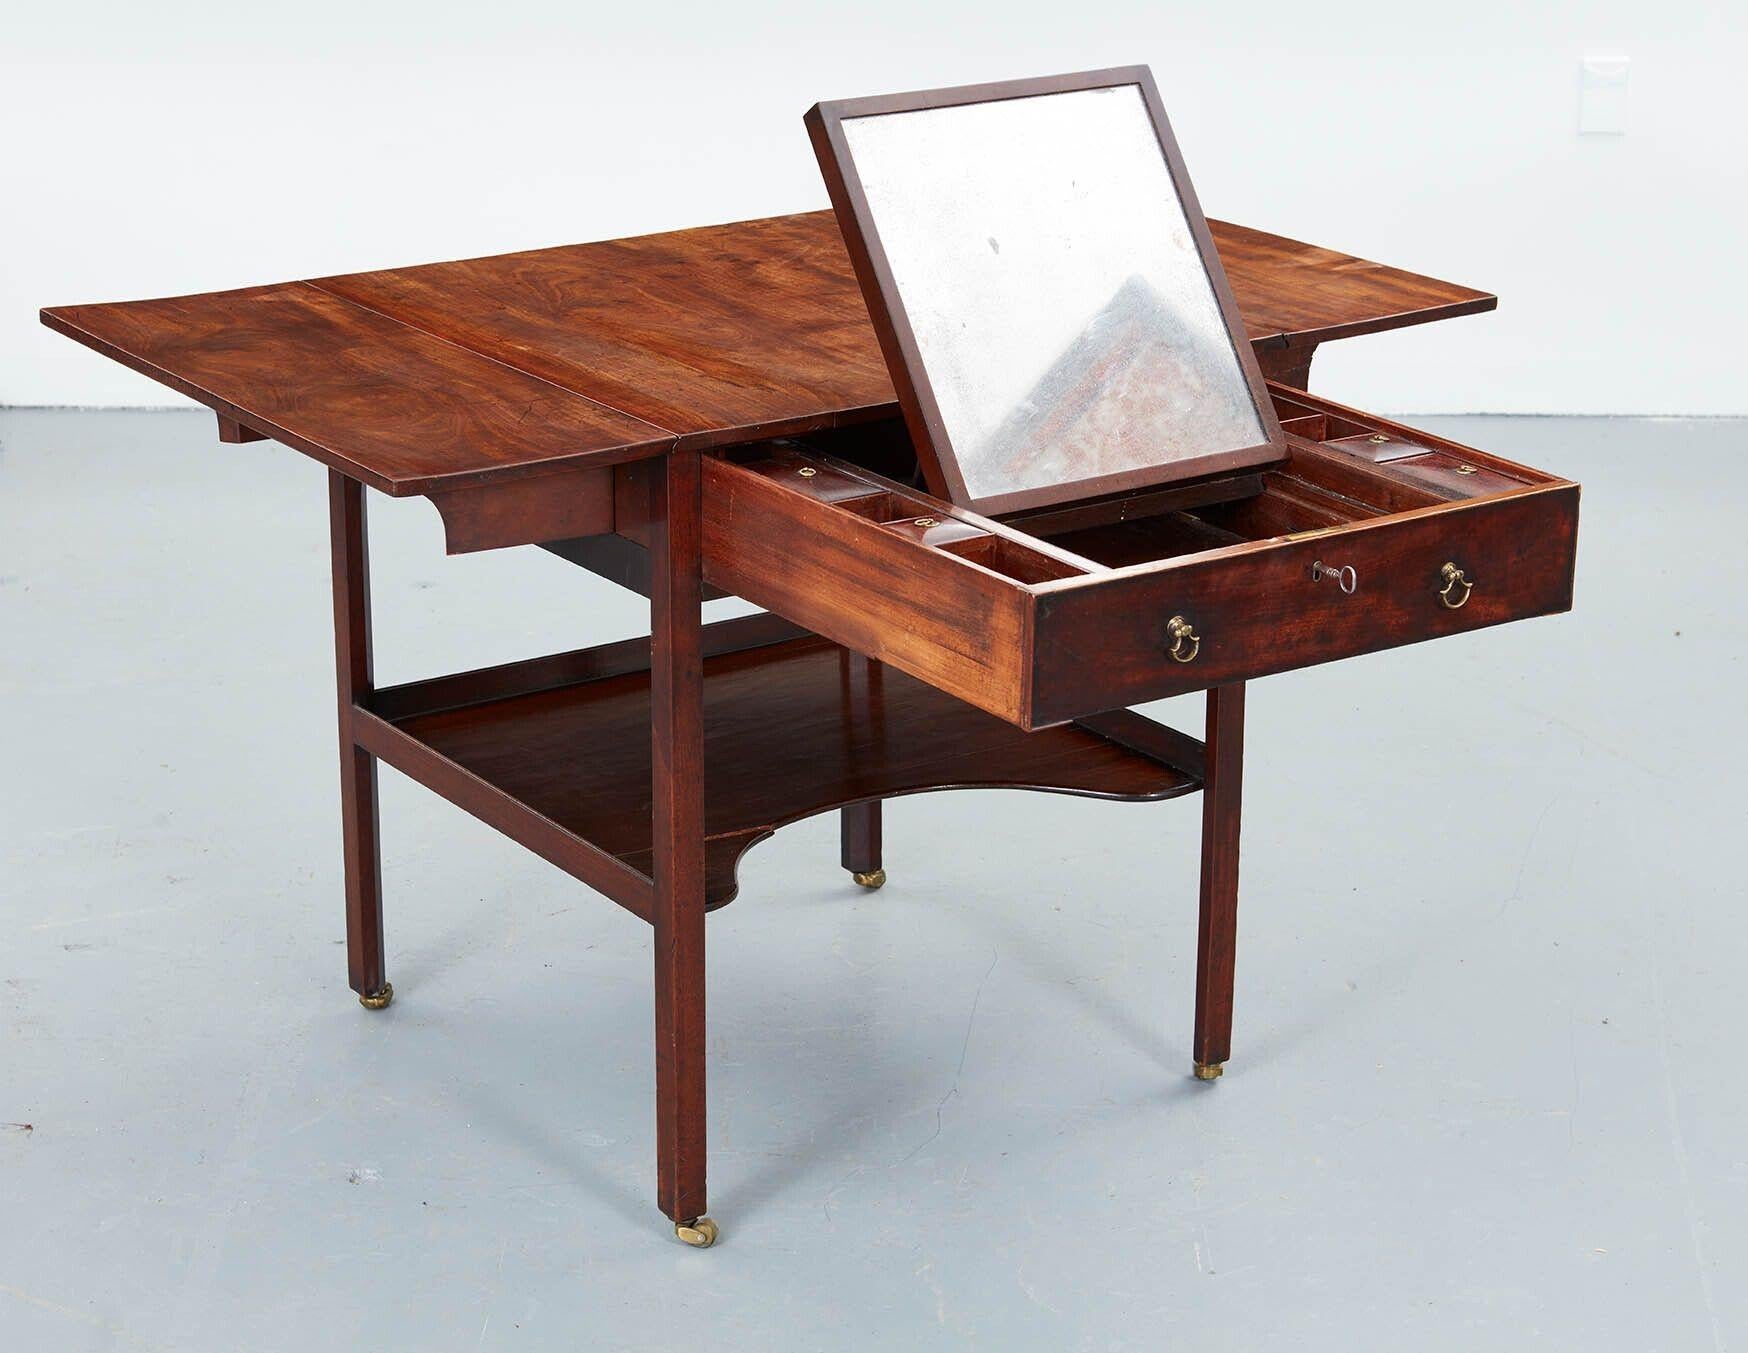 Exceedingly fine George III gentleman's dressing table/Pembroke table attributed to Thomas Chippendale, the richly figured mahogany top with drop leaves, over fully fitted drawer with lidded compartments and having a pull-out dressing mirror,